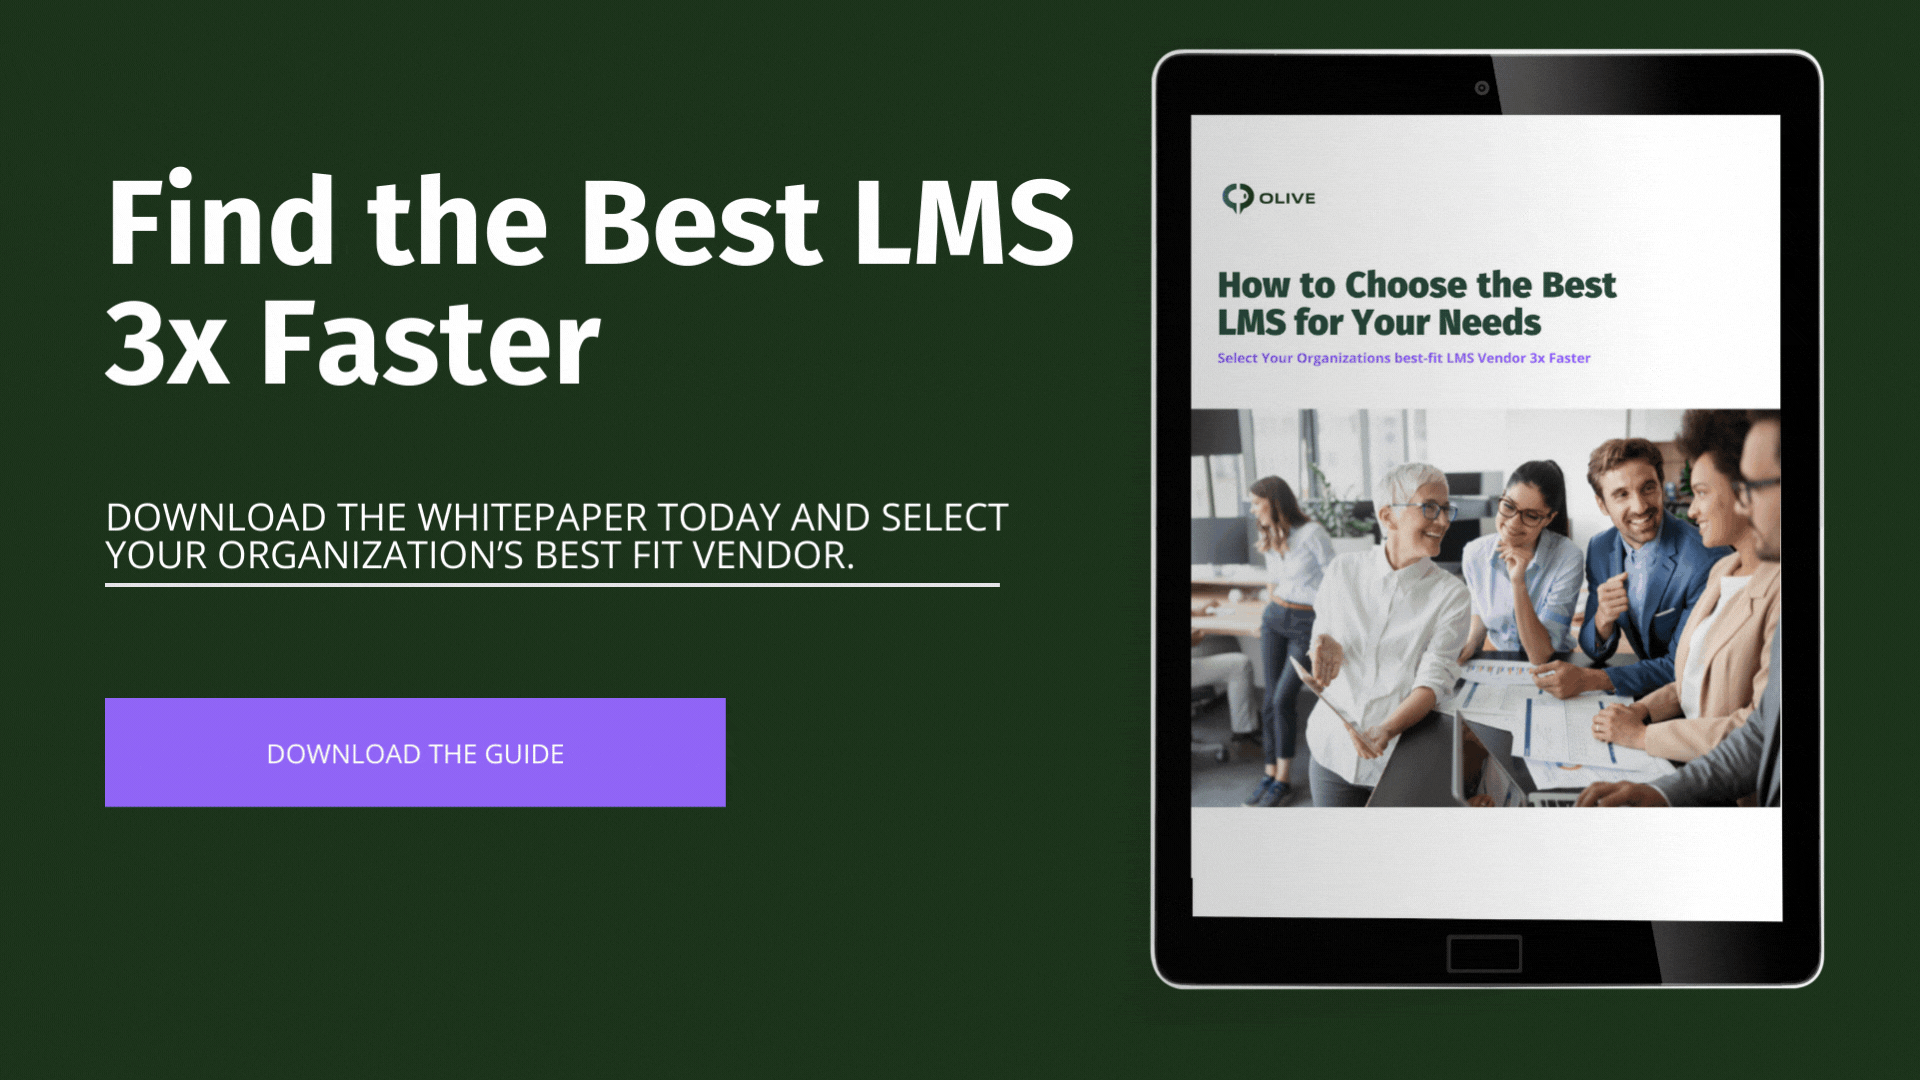 CTA dowload white paper how to find the best lms 3x faster